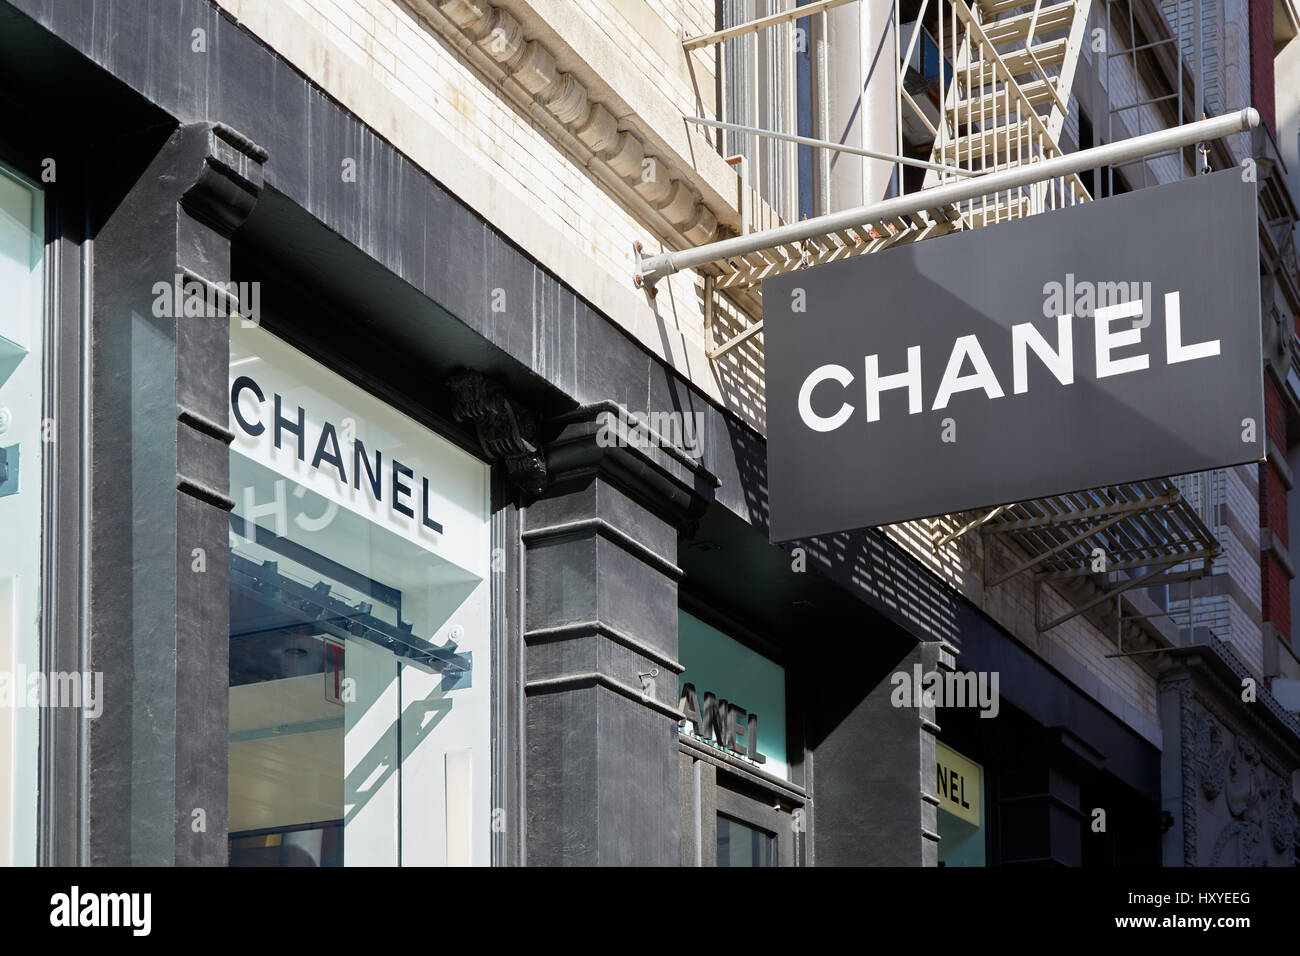 chanel sign